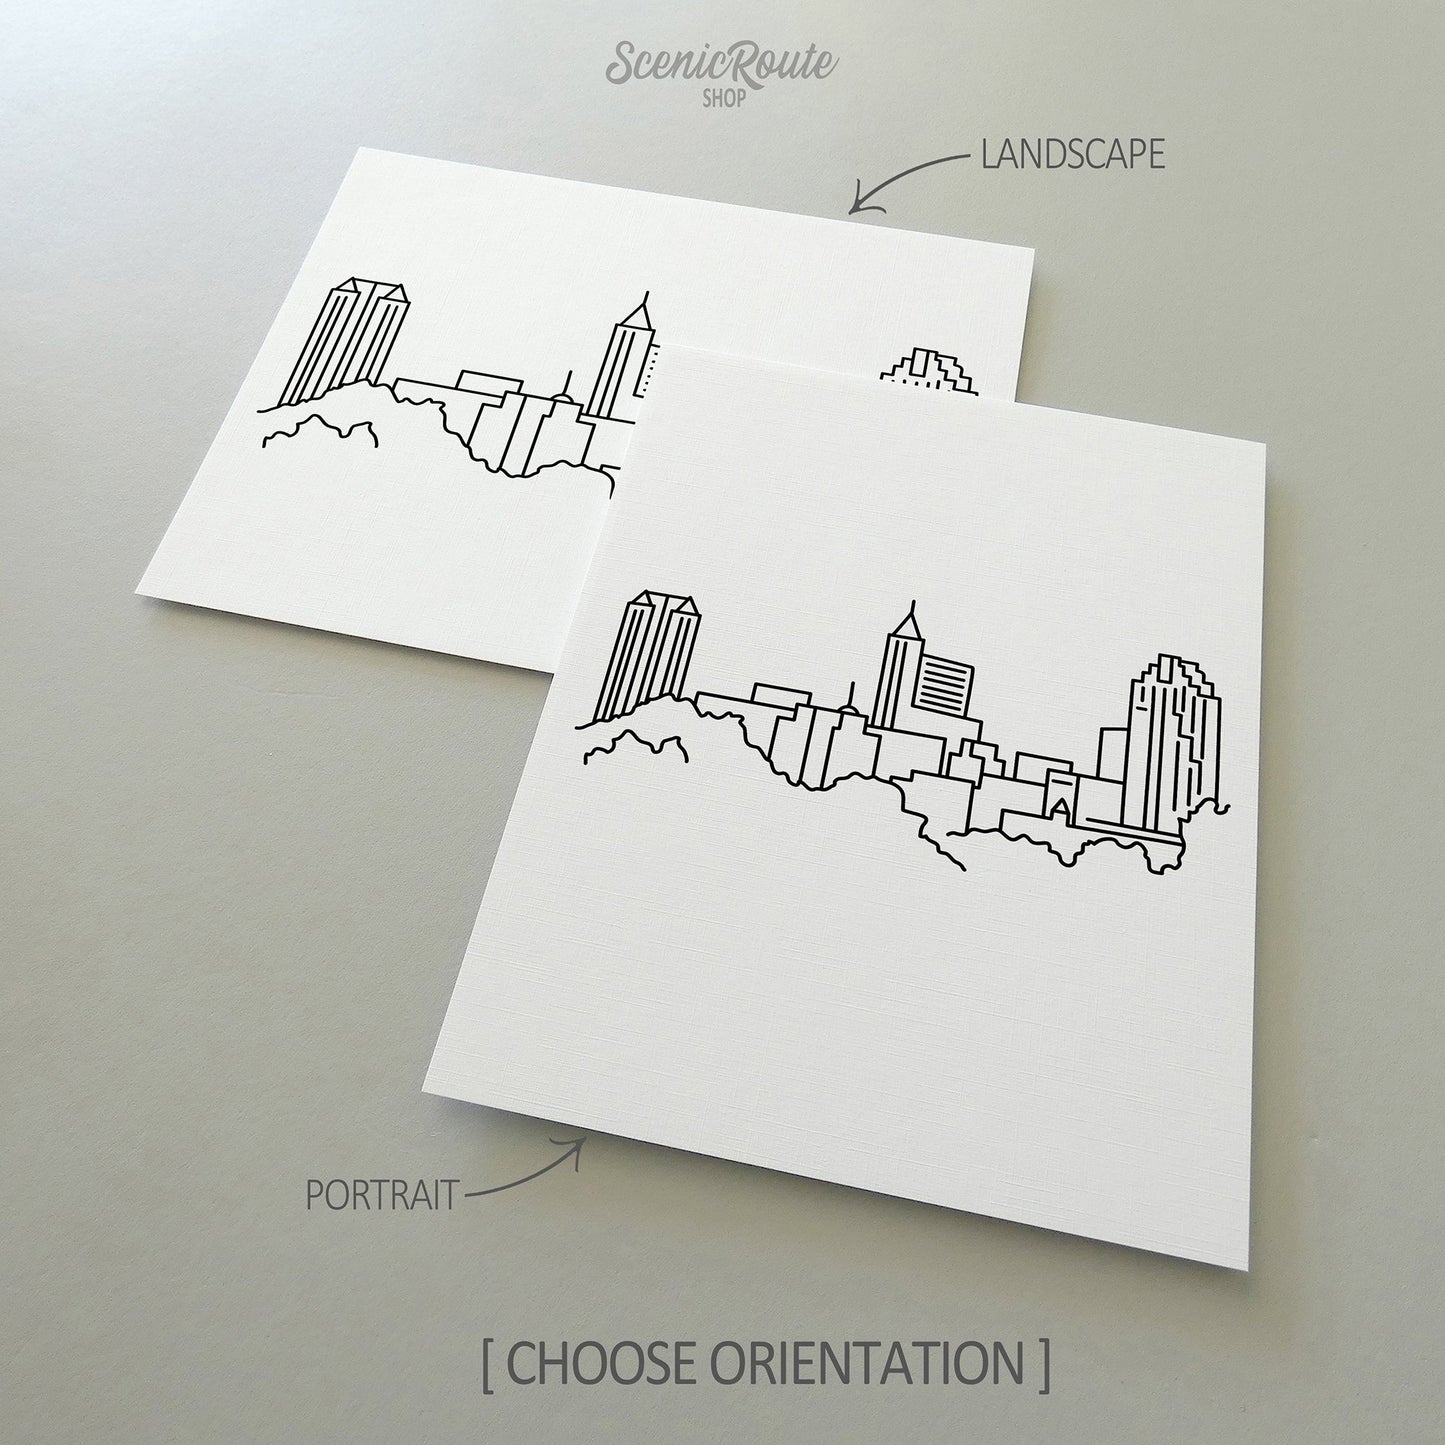 Two line art drawings of the Raleigh Skyline on white linen paper with a gray background.  The pieces are shown in portrait and landscape orientation for the available art print options.